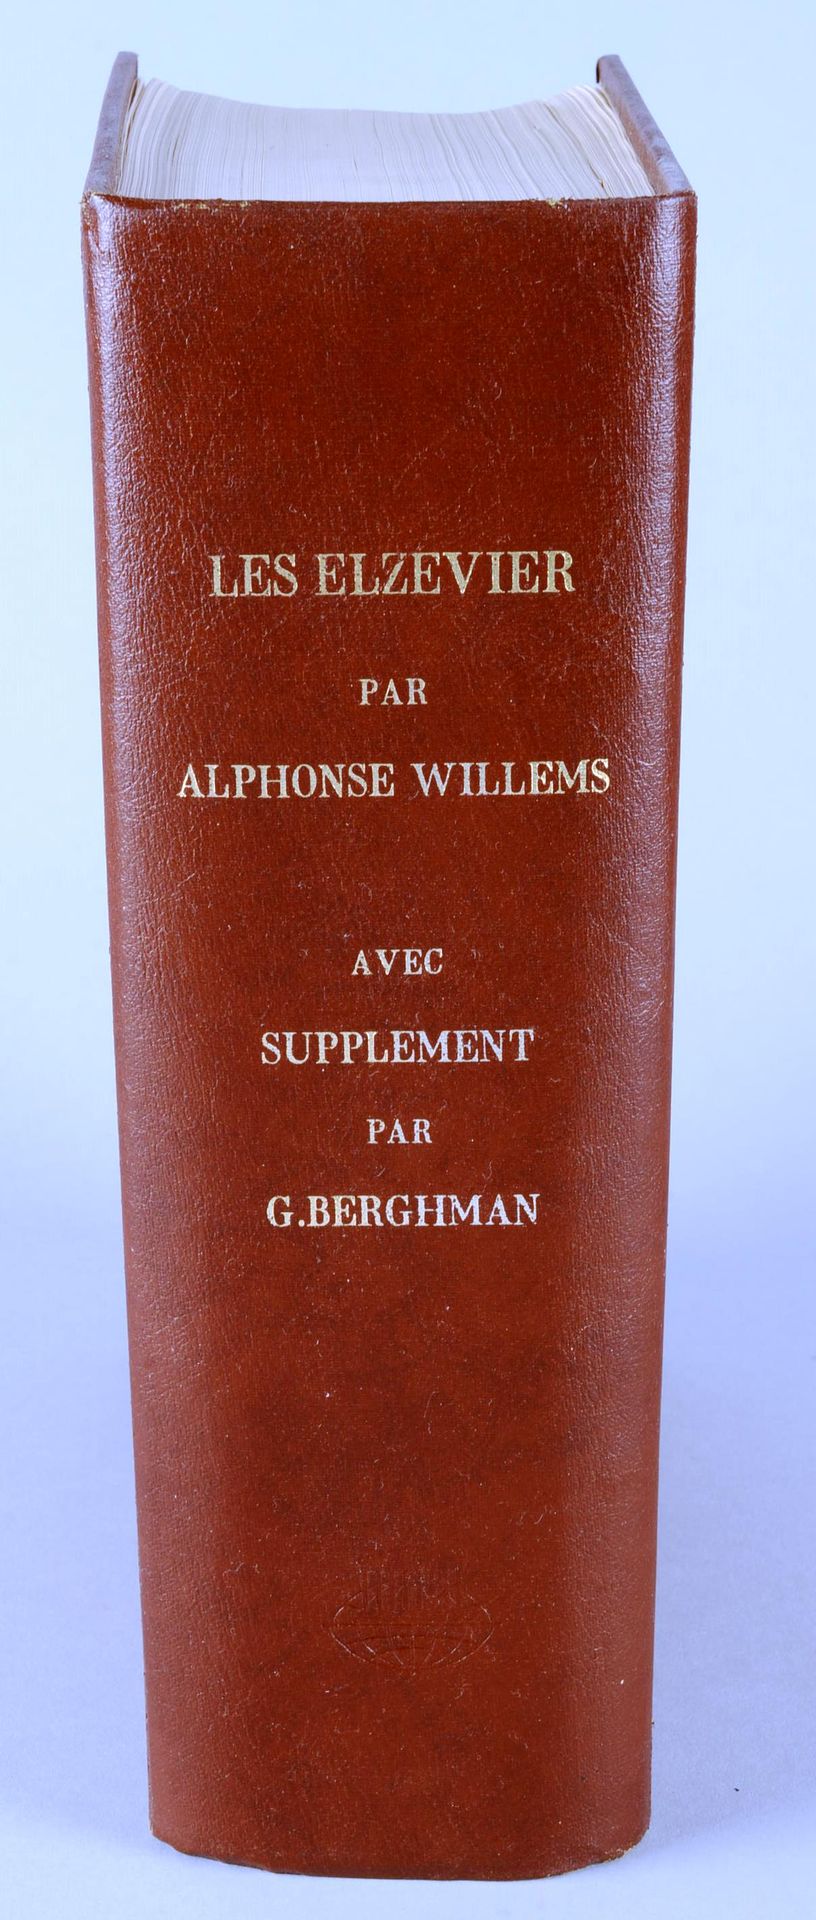 WILLEMS Alphonse WILLEMS Alphonse



The Elzeviers - History and typographical a&hellip;